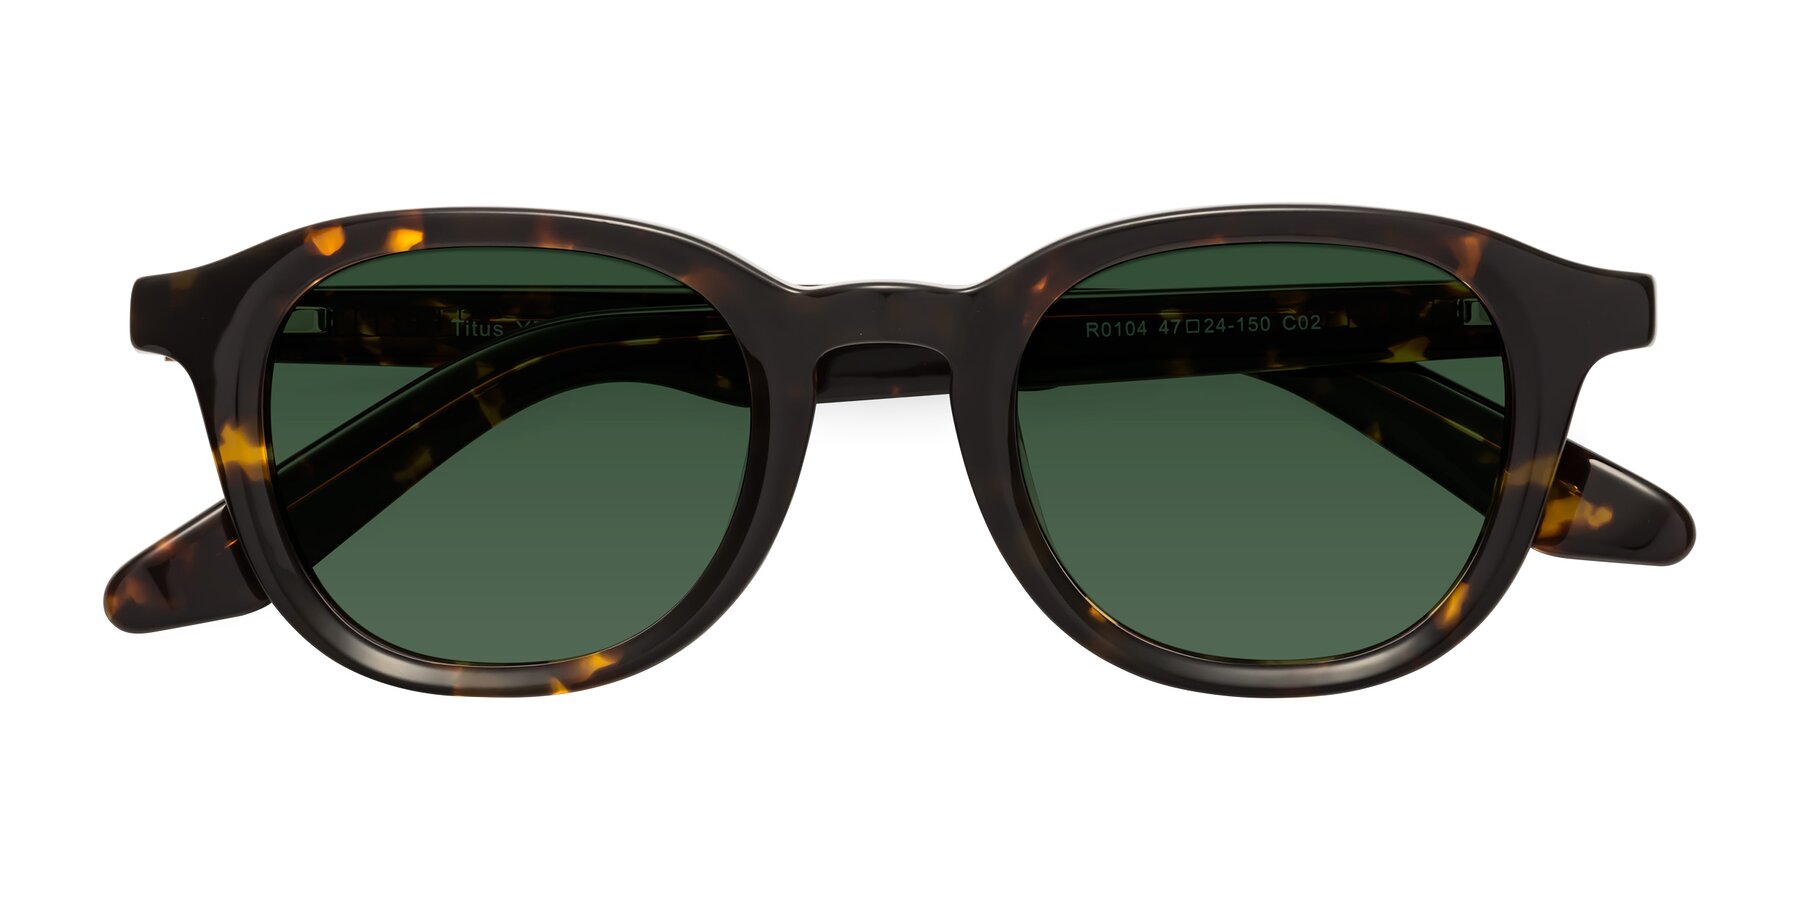 Tortoise Spring Hinges Acetate Oval Tinted Sunglasses with Green Sunwear  Lenses - Titus